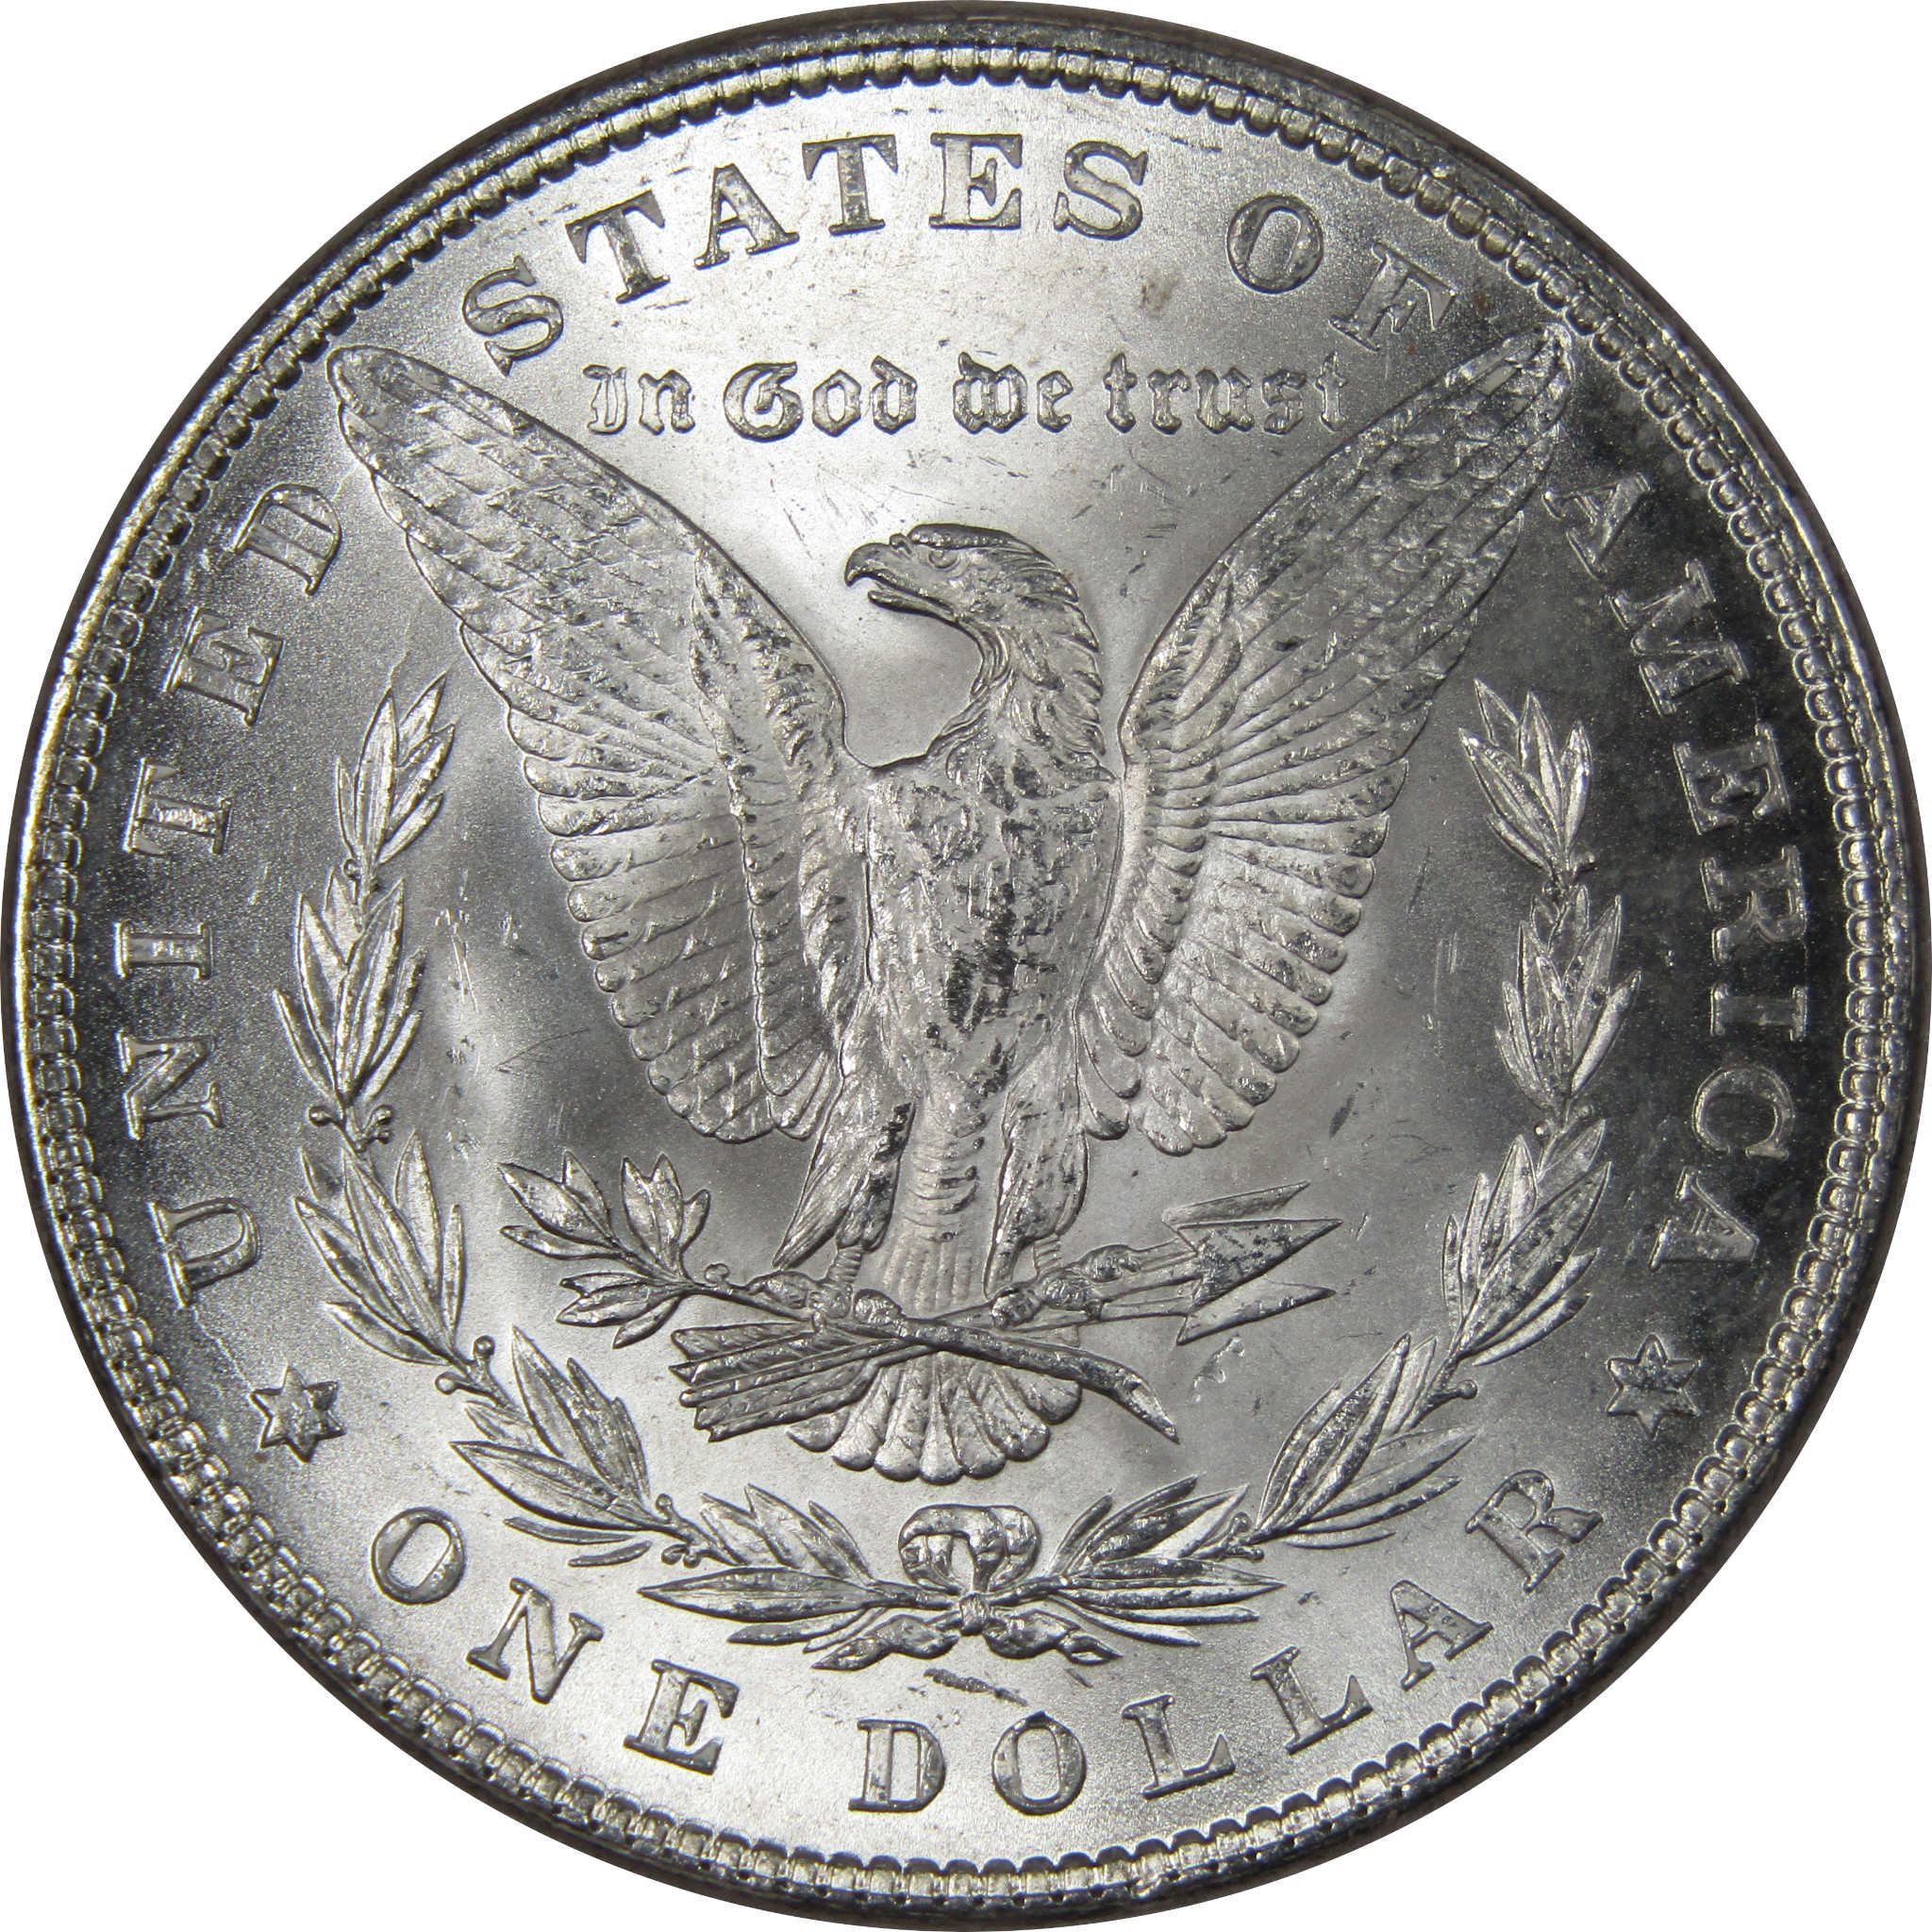 1882 Morgan Dollar BU Uncirculated Mint State 90% Silver SKU:IPC9711 - Morgan coin - Morgan silver dollar - Morgan silver dollar for sale - Profile Coins &amp; Collectibles